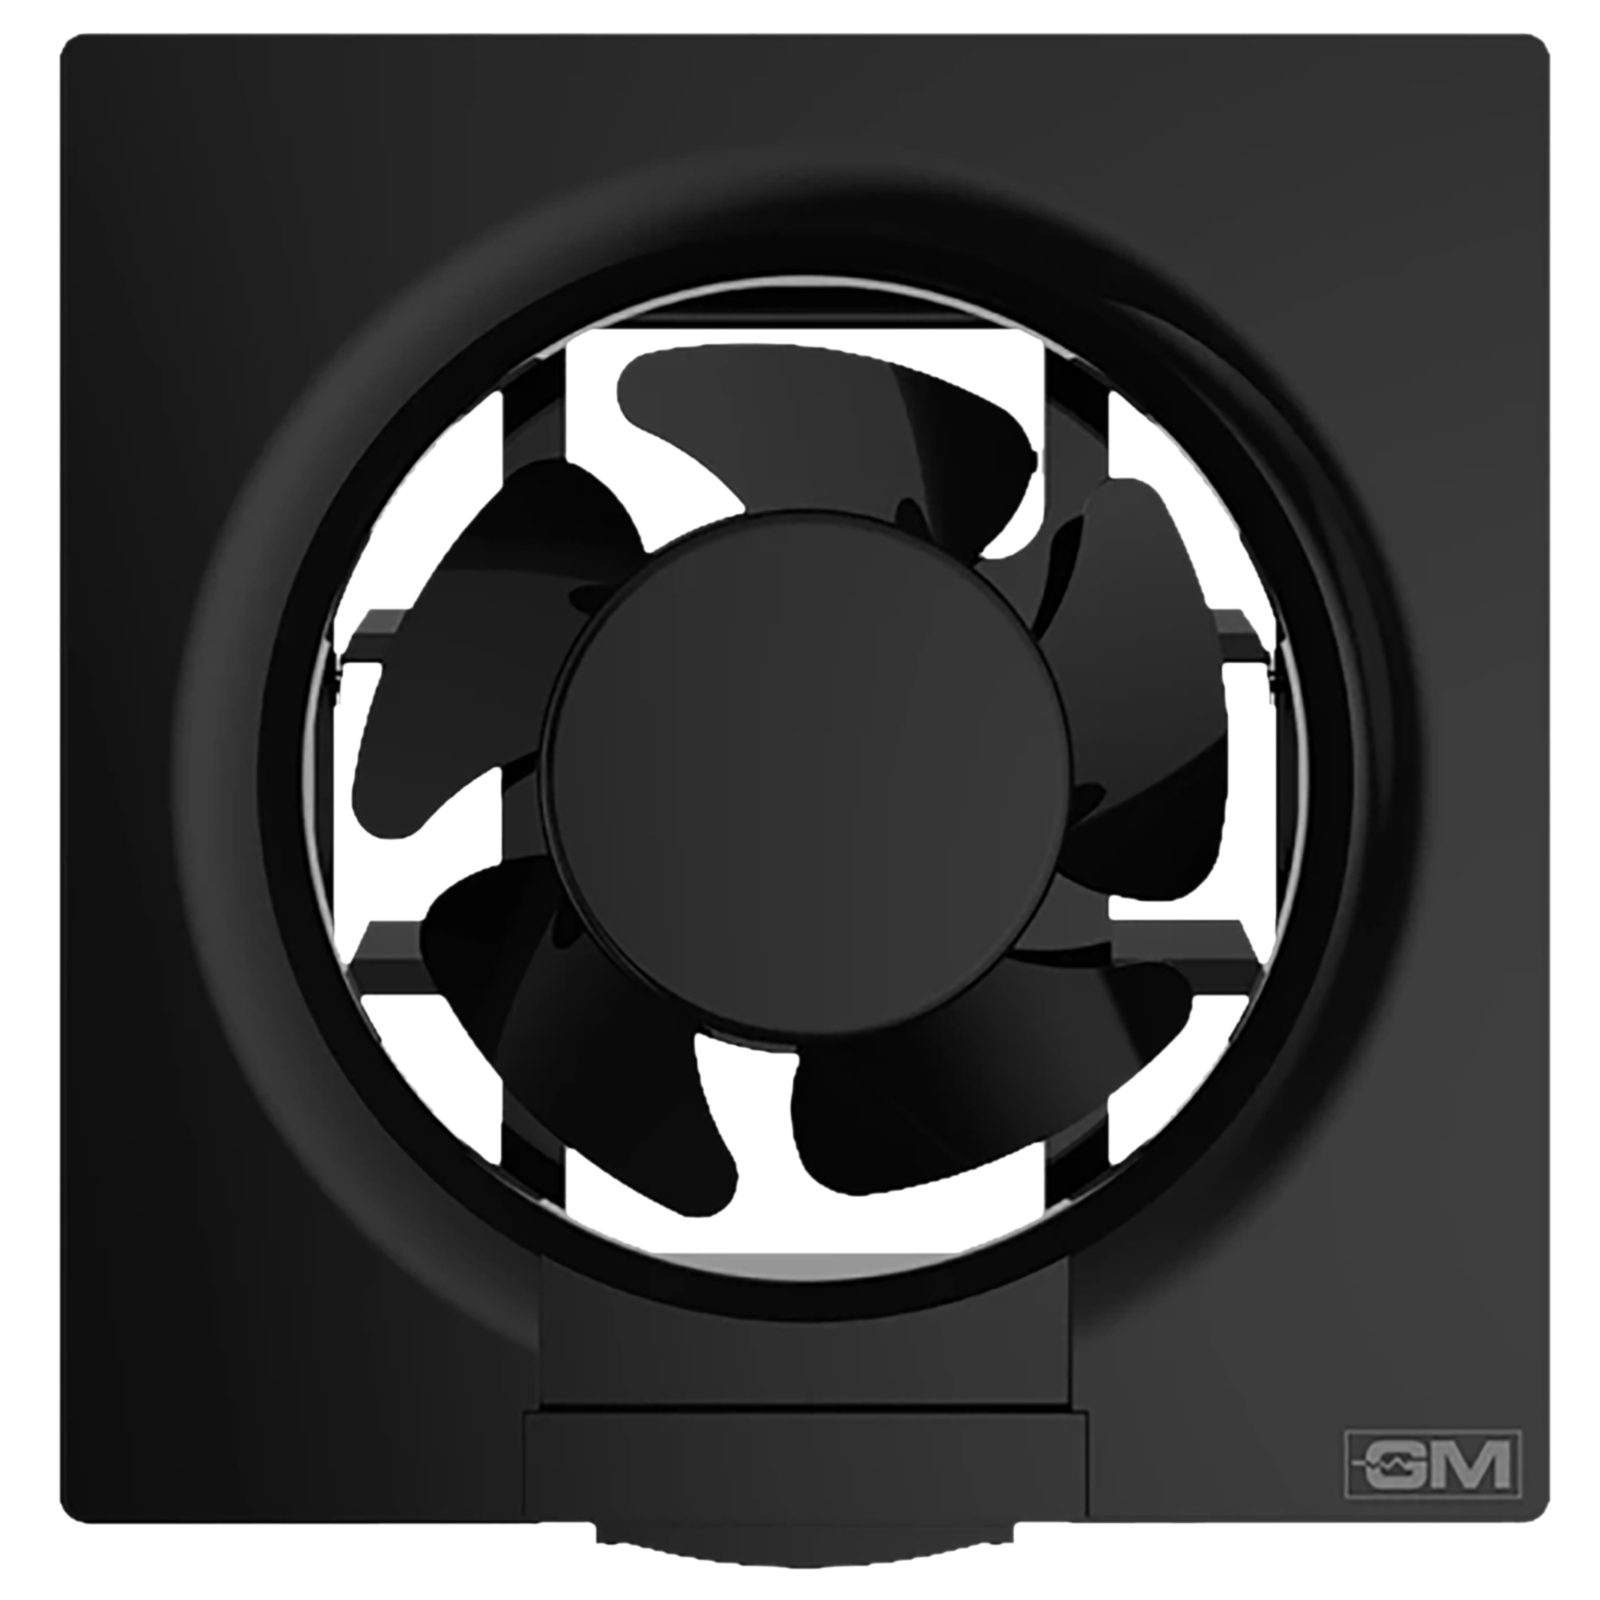 GM Eco Air 150mm Exhaust Fan (Low Noise Operation, Black)